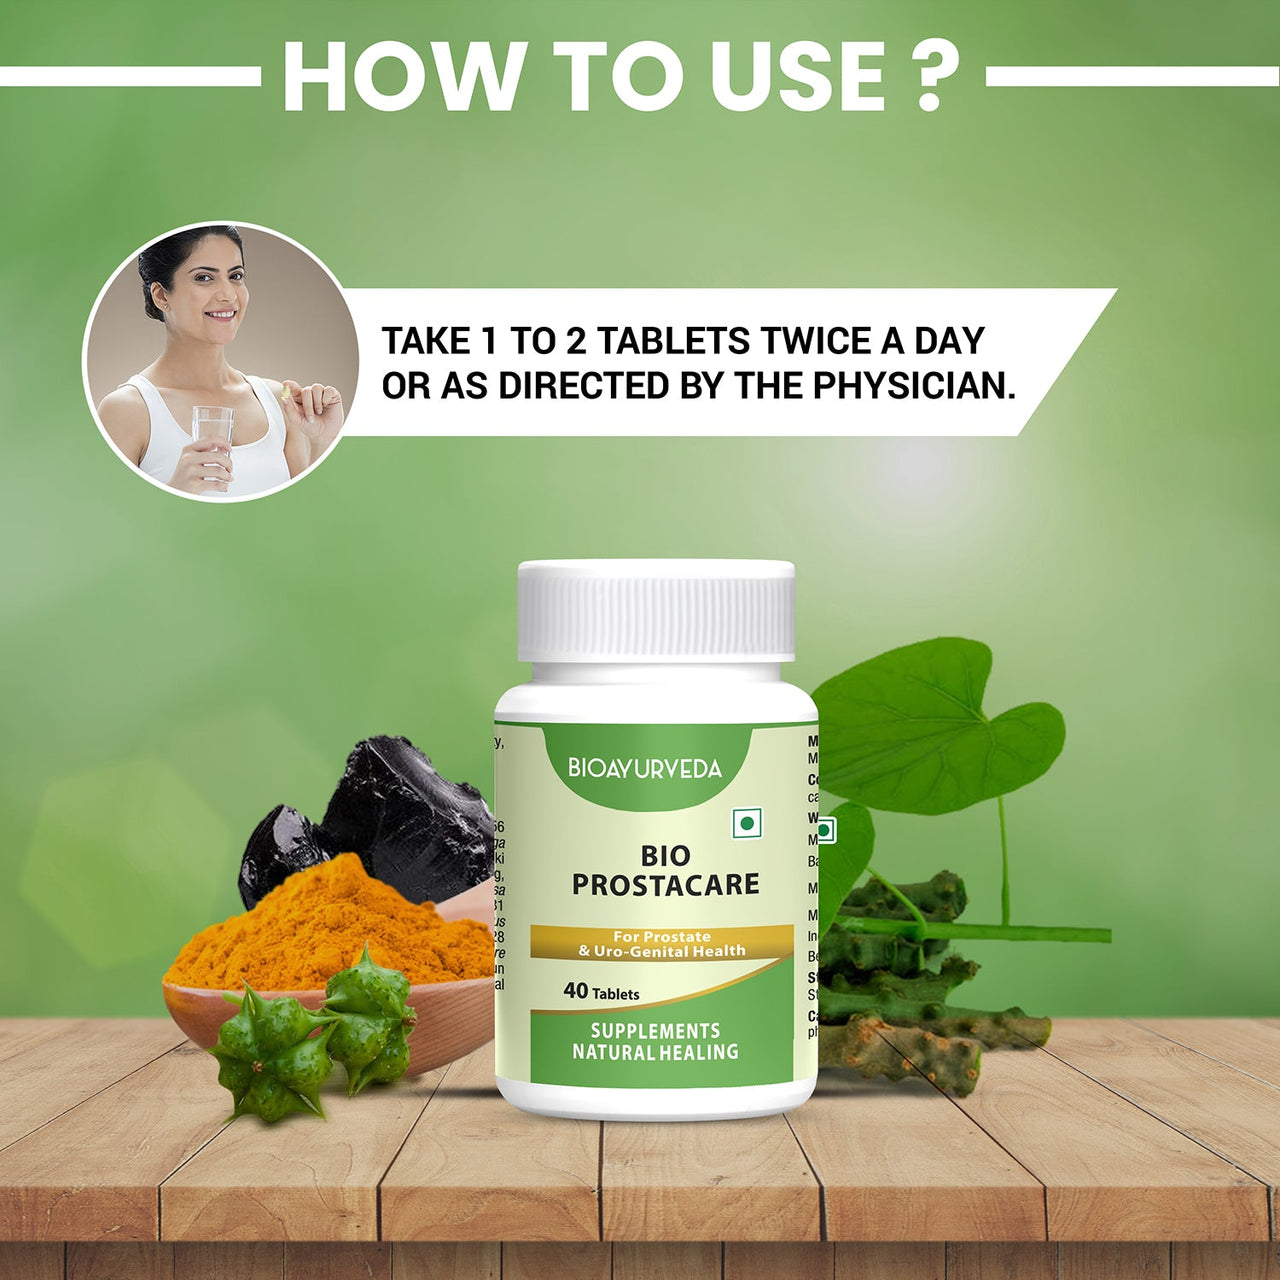 How To Use Bio Prostacare Tablet